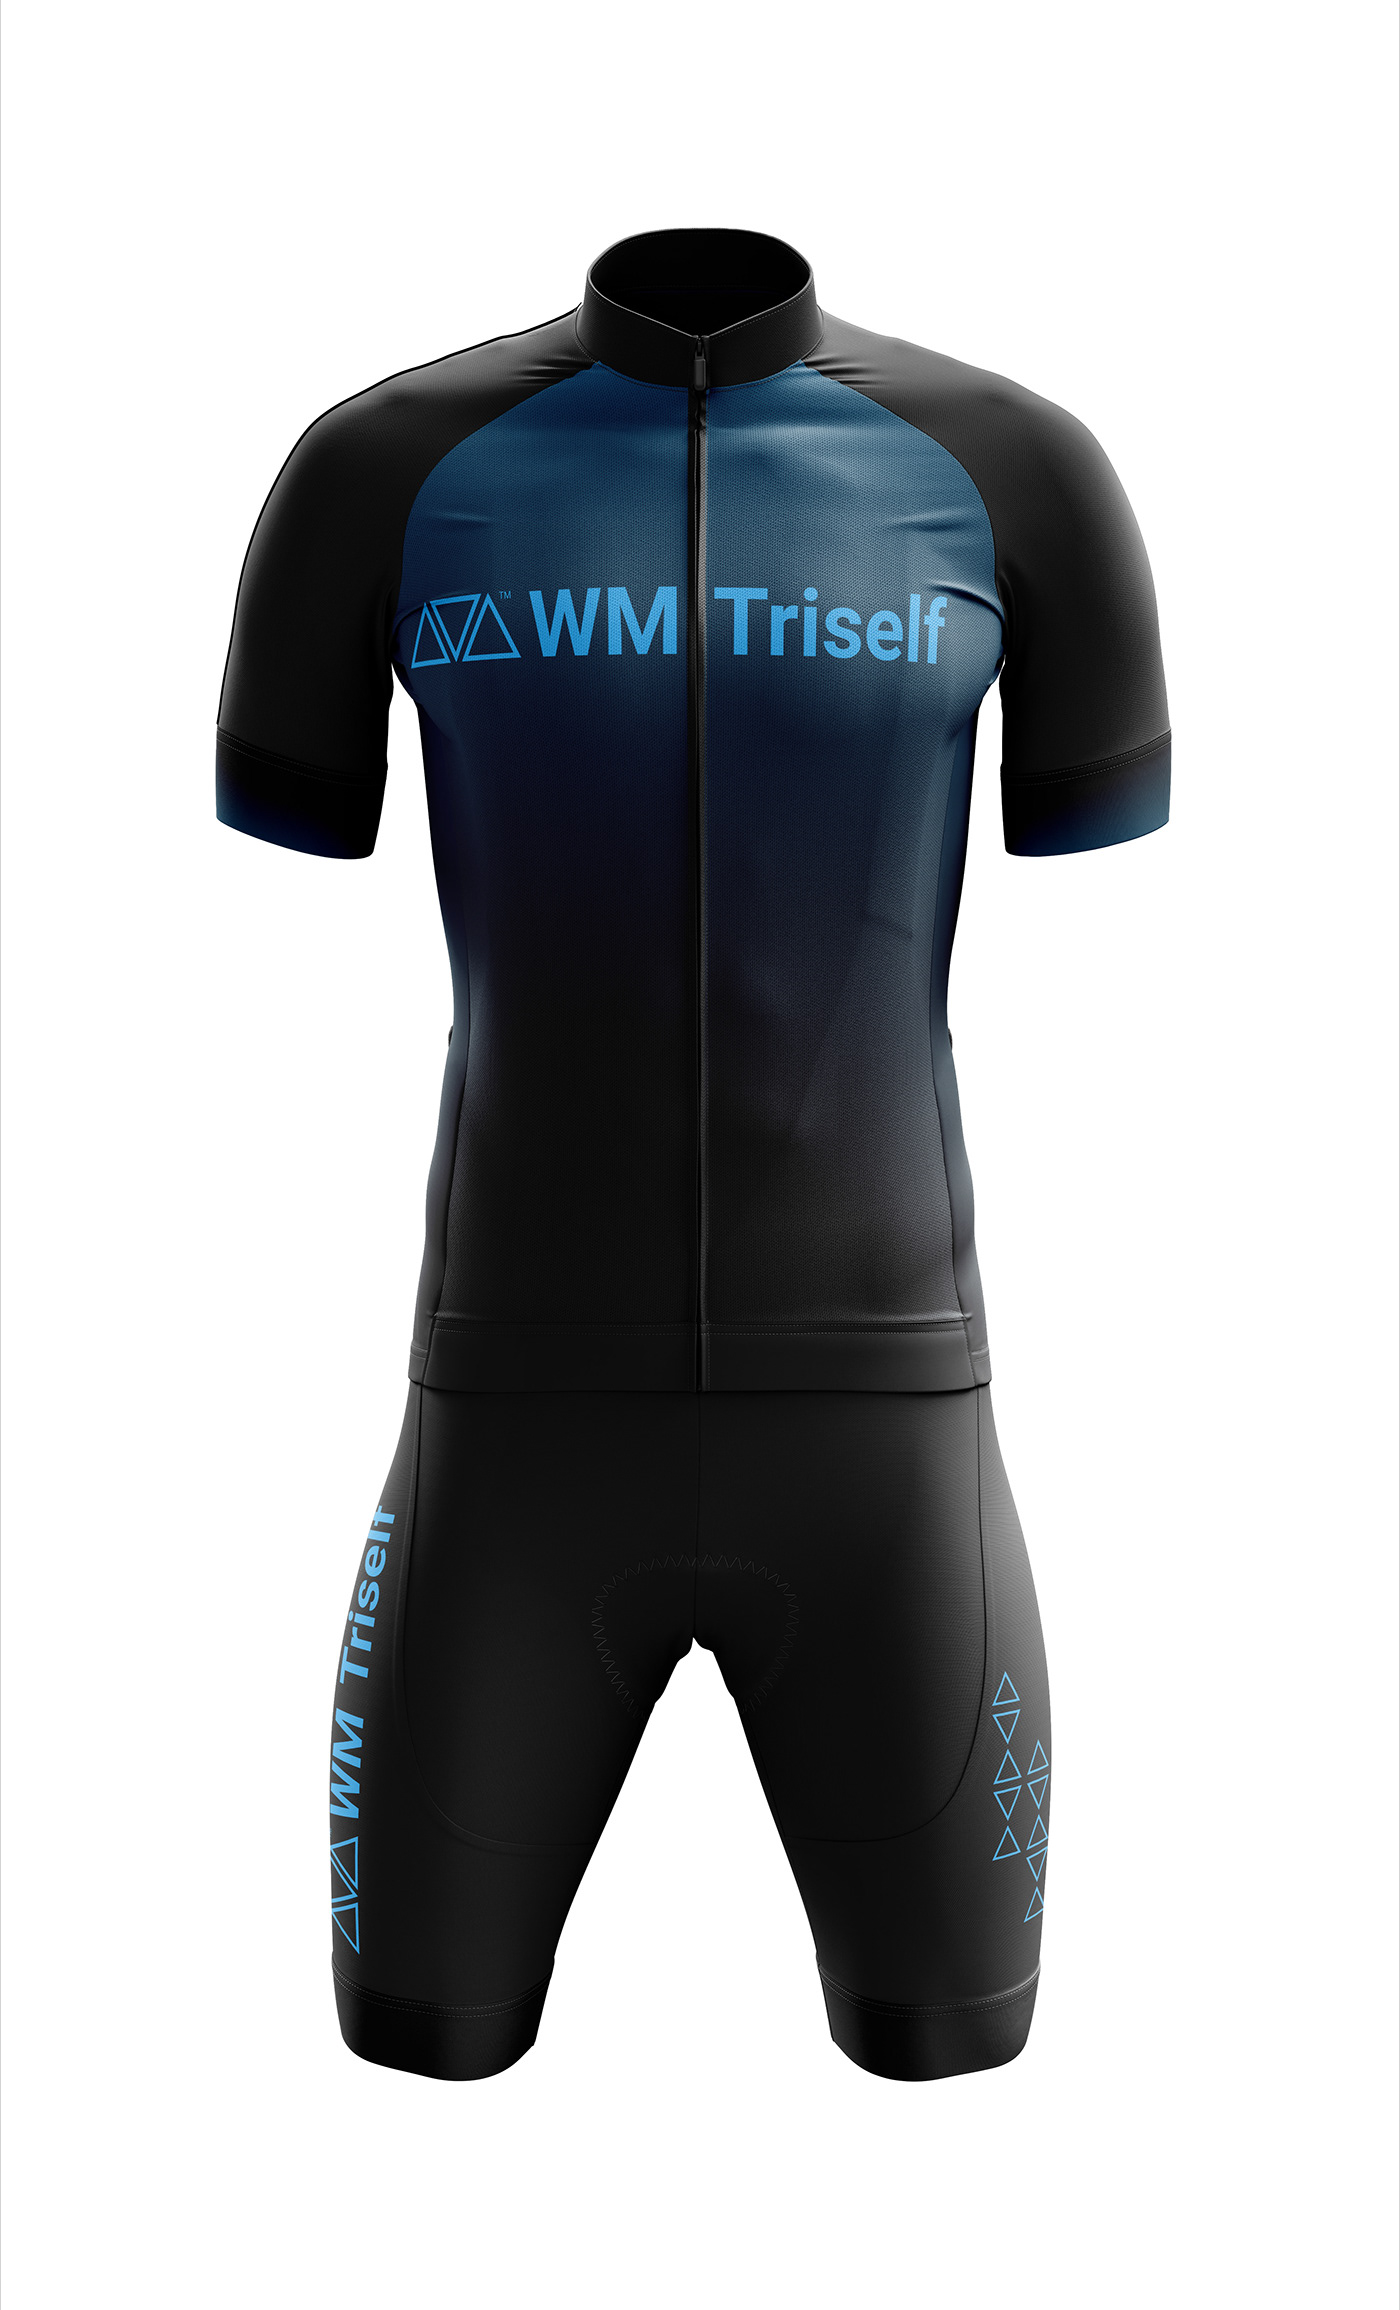 Clothing Cycling cycling design cycyling outfit sports outfit design